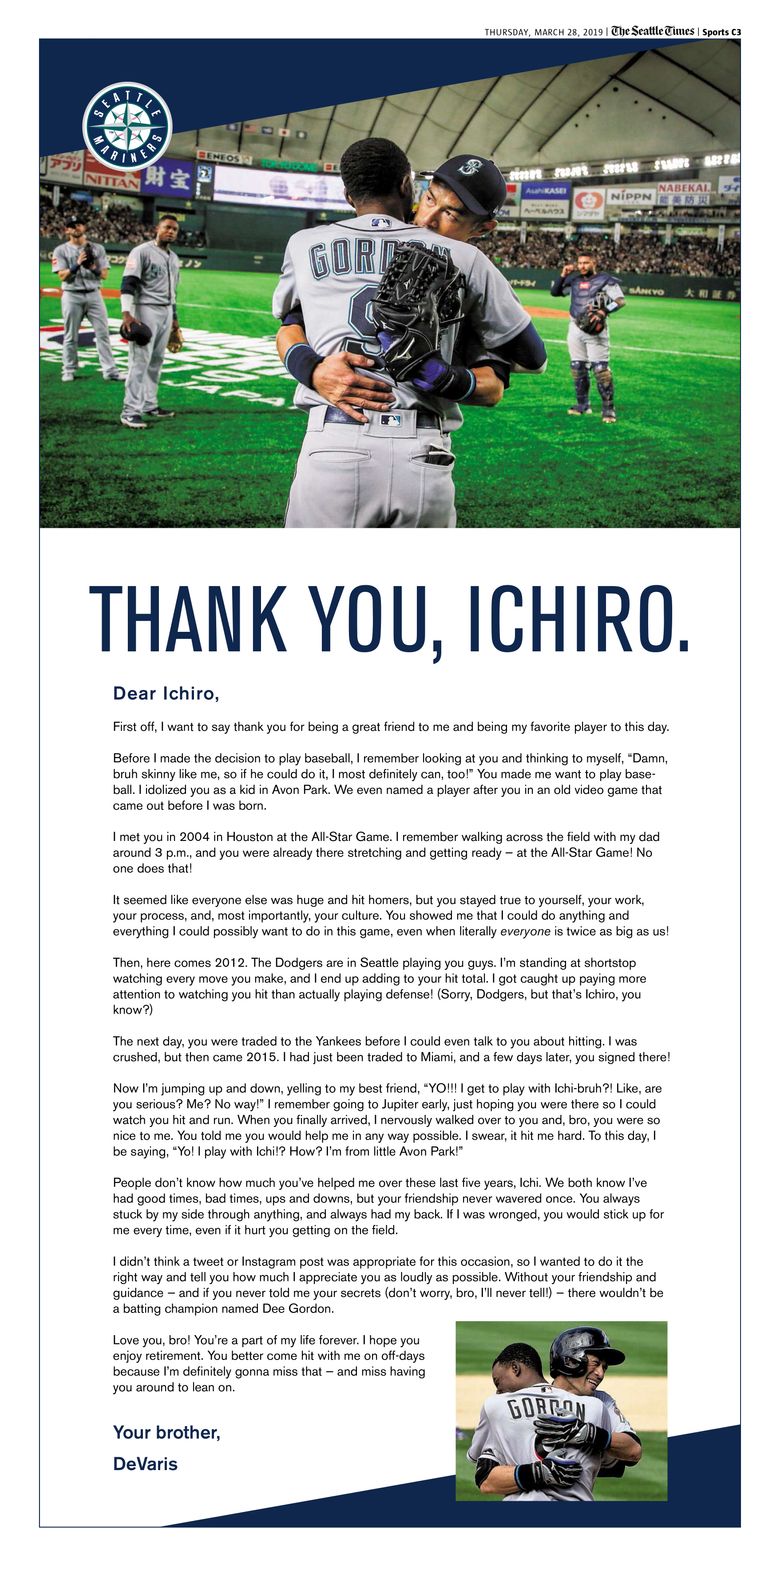 Appreciating Ichiro's Many Fashion Choices - Lookout Landing